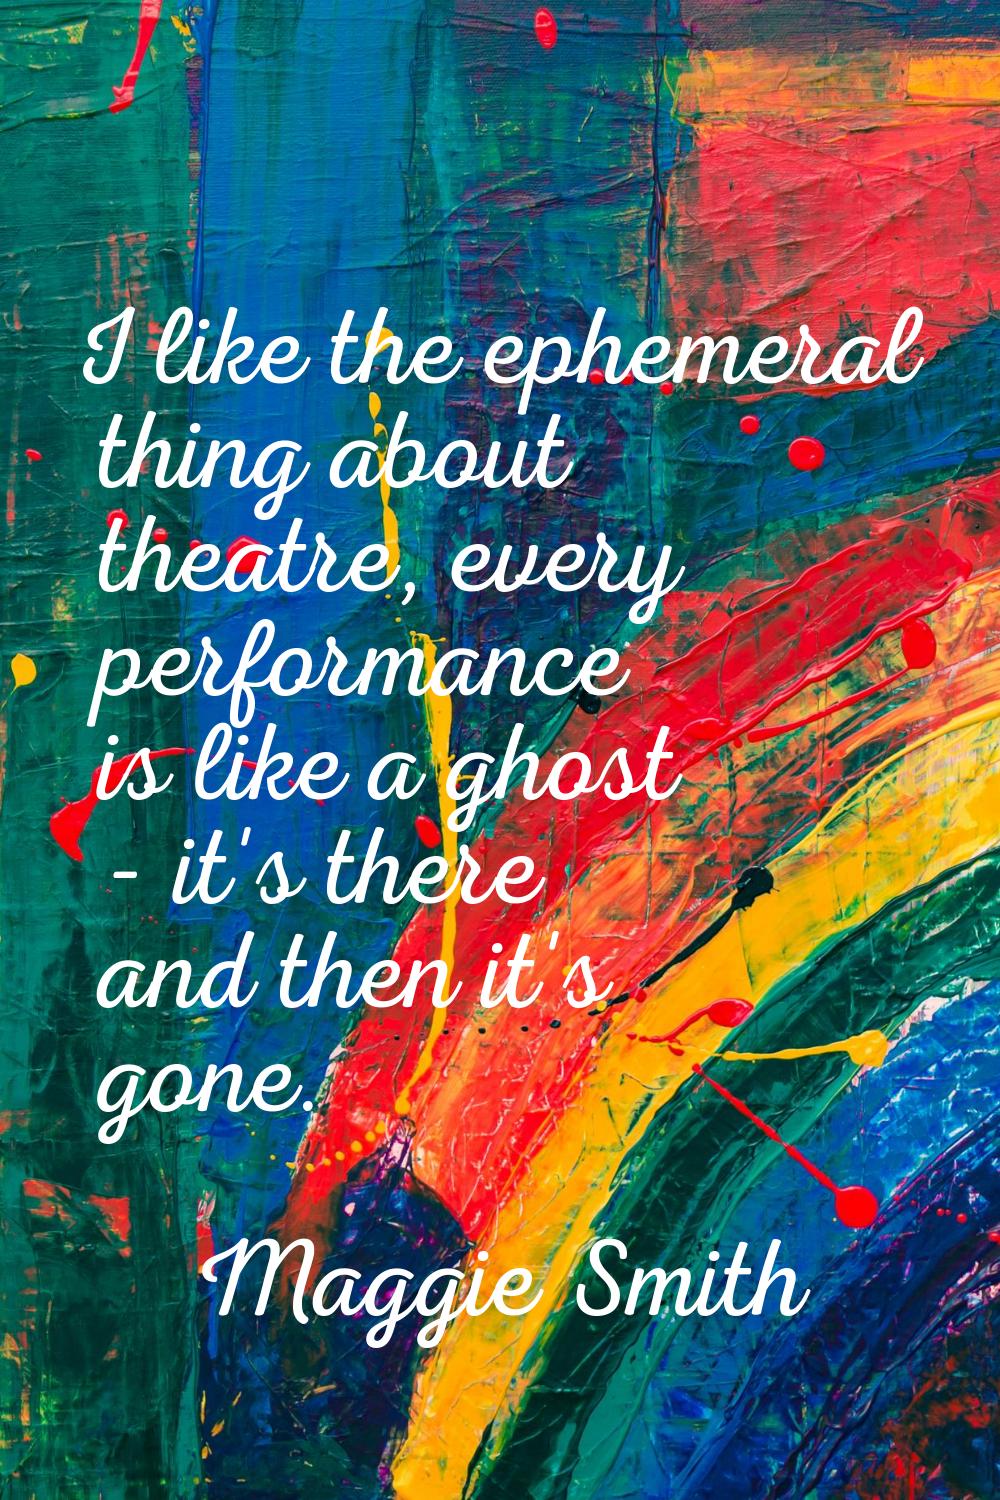 I like the ephemeral thing about theatre, every performance is like a ghost - it's there and then i